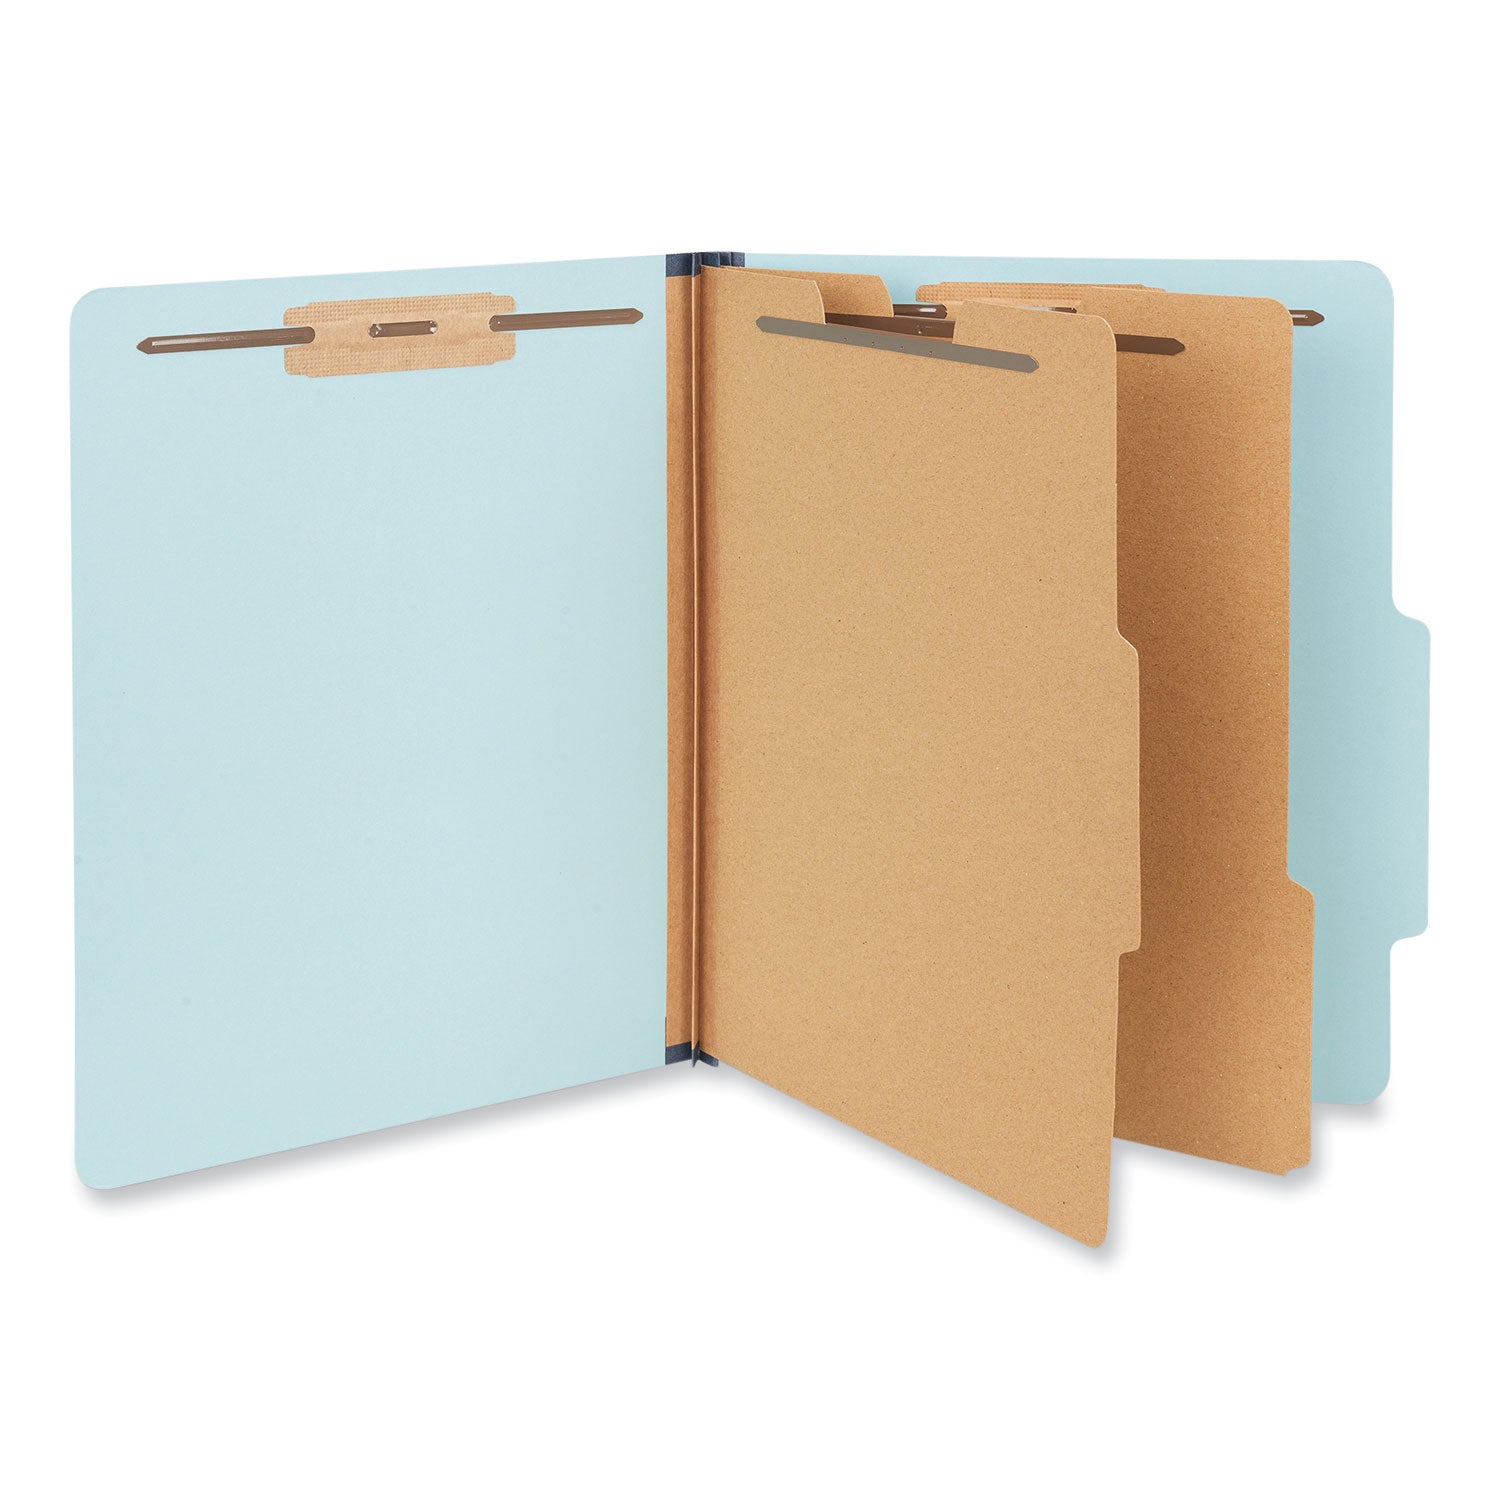 six-section-pressboard-classification-folders-25-expansion-2-dividers-6-fasteners-letter-size-light-blue-20-box_unv10405 - 2